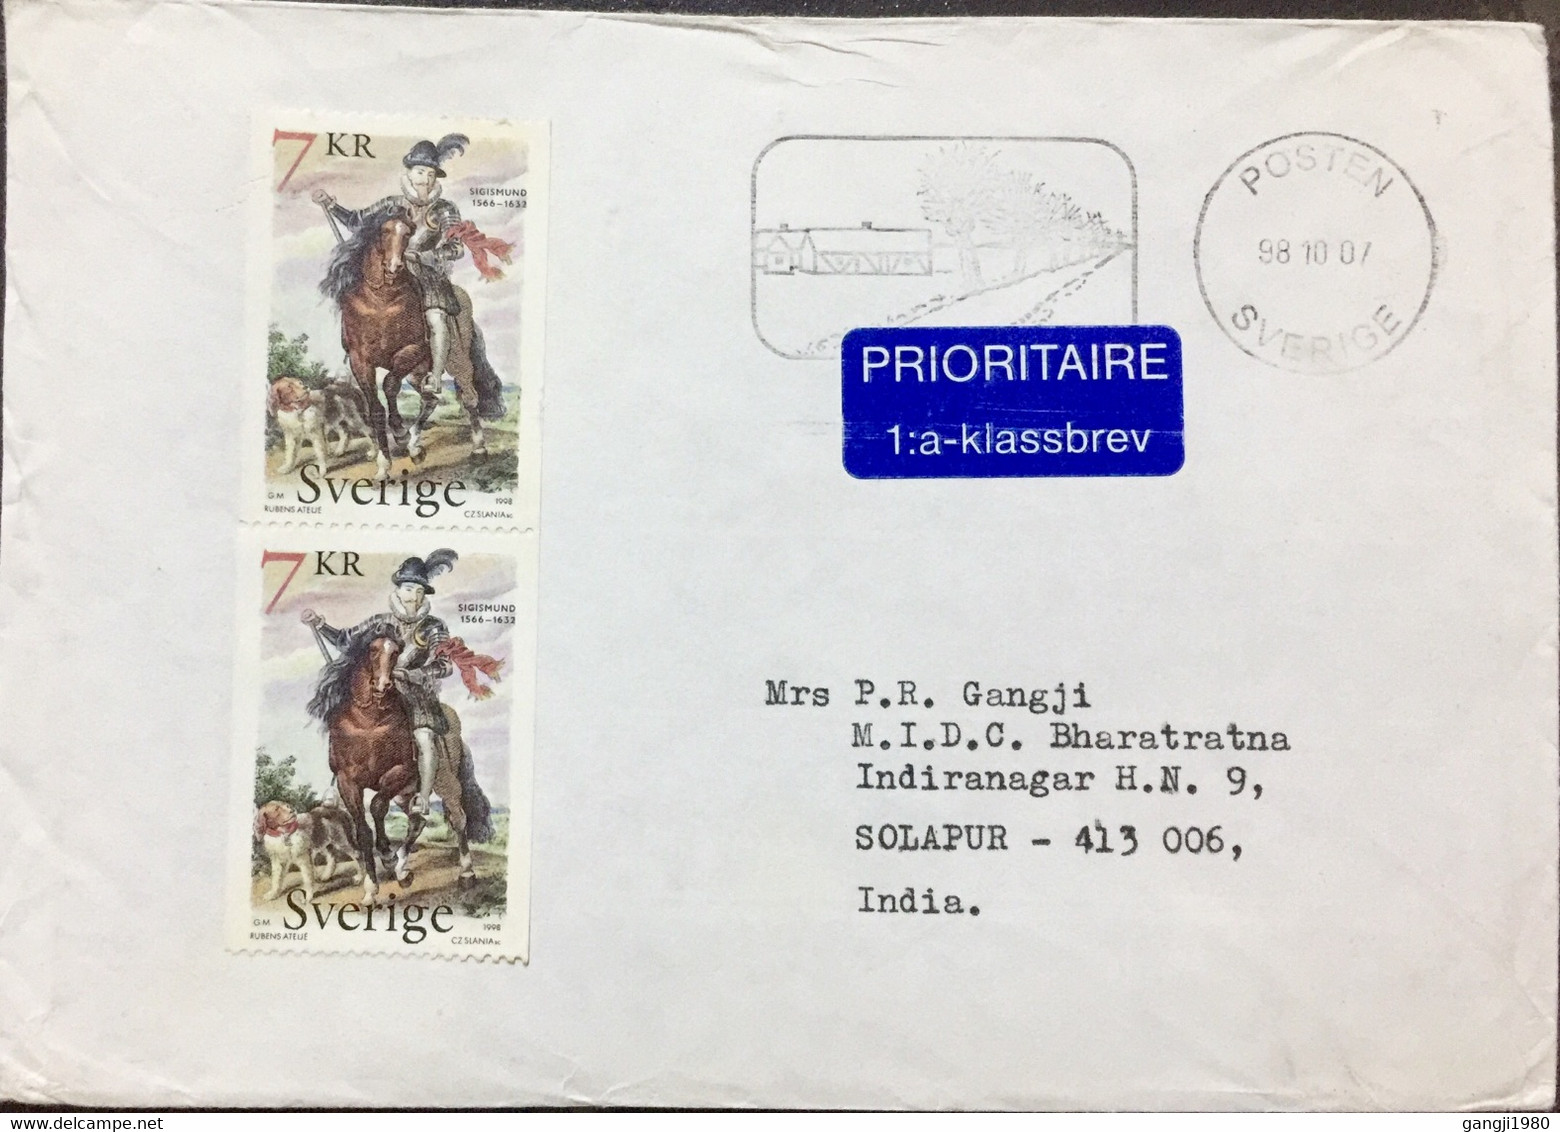 SWEDEN 2007, AIRMAIL COVER USED TO INDIA,POSTEN PICTURAL SLOGAN,CANCELLATION!!! SIGISMUND 1998 STAMPS PAIR - Cartas & Documentos